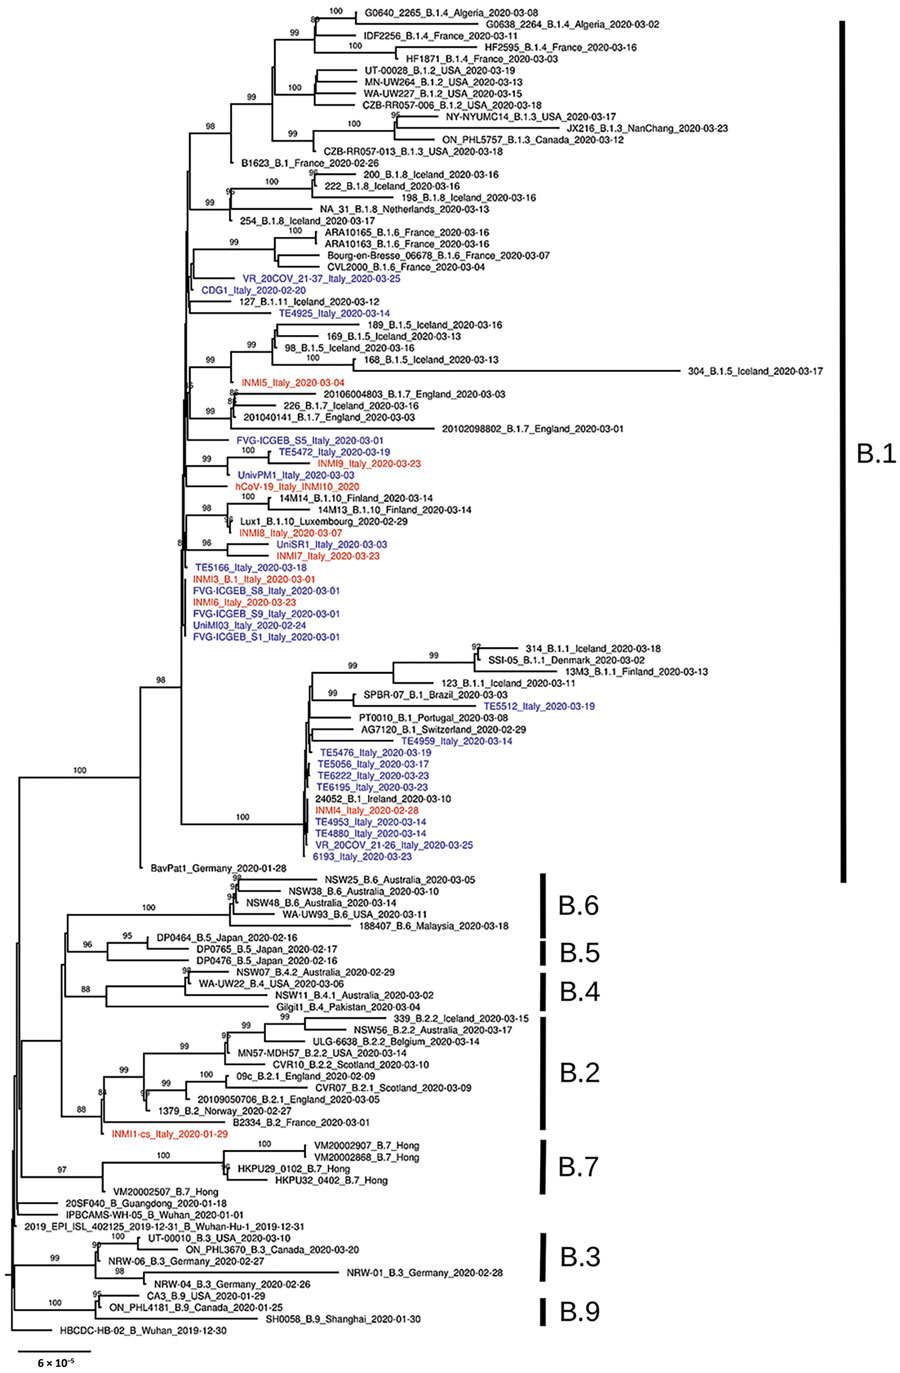 Phylogenetic analysis of 150 severe acute respiratory syndrome coronavirus 2 representative genome sequences, including genomes collected in Italy (blue) and sequences identified for this study at the National Institute for Infectious Diseases (red). Available genomes were retrieved from GISAID (https://www.gisaid.org) on April 10, 2020; we discarded sequences with low coverage depth (low amount of read sequenced) or low coverage length (not complete genome sequences). Representative sequences f